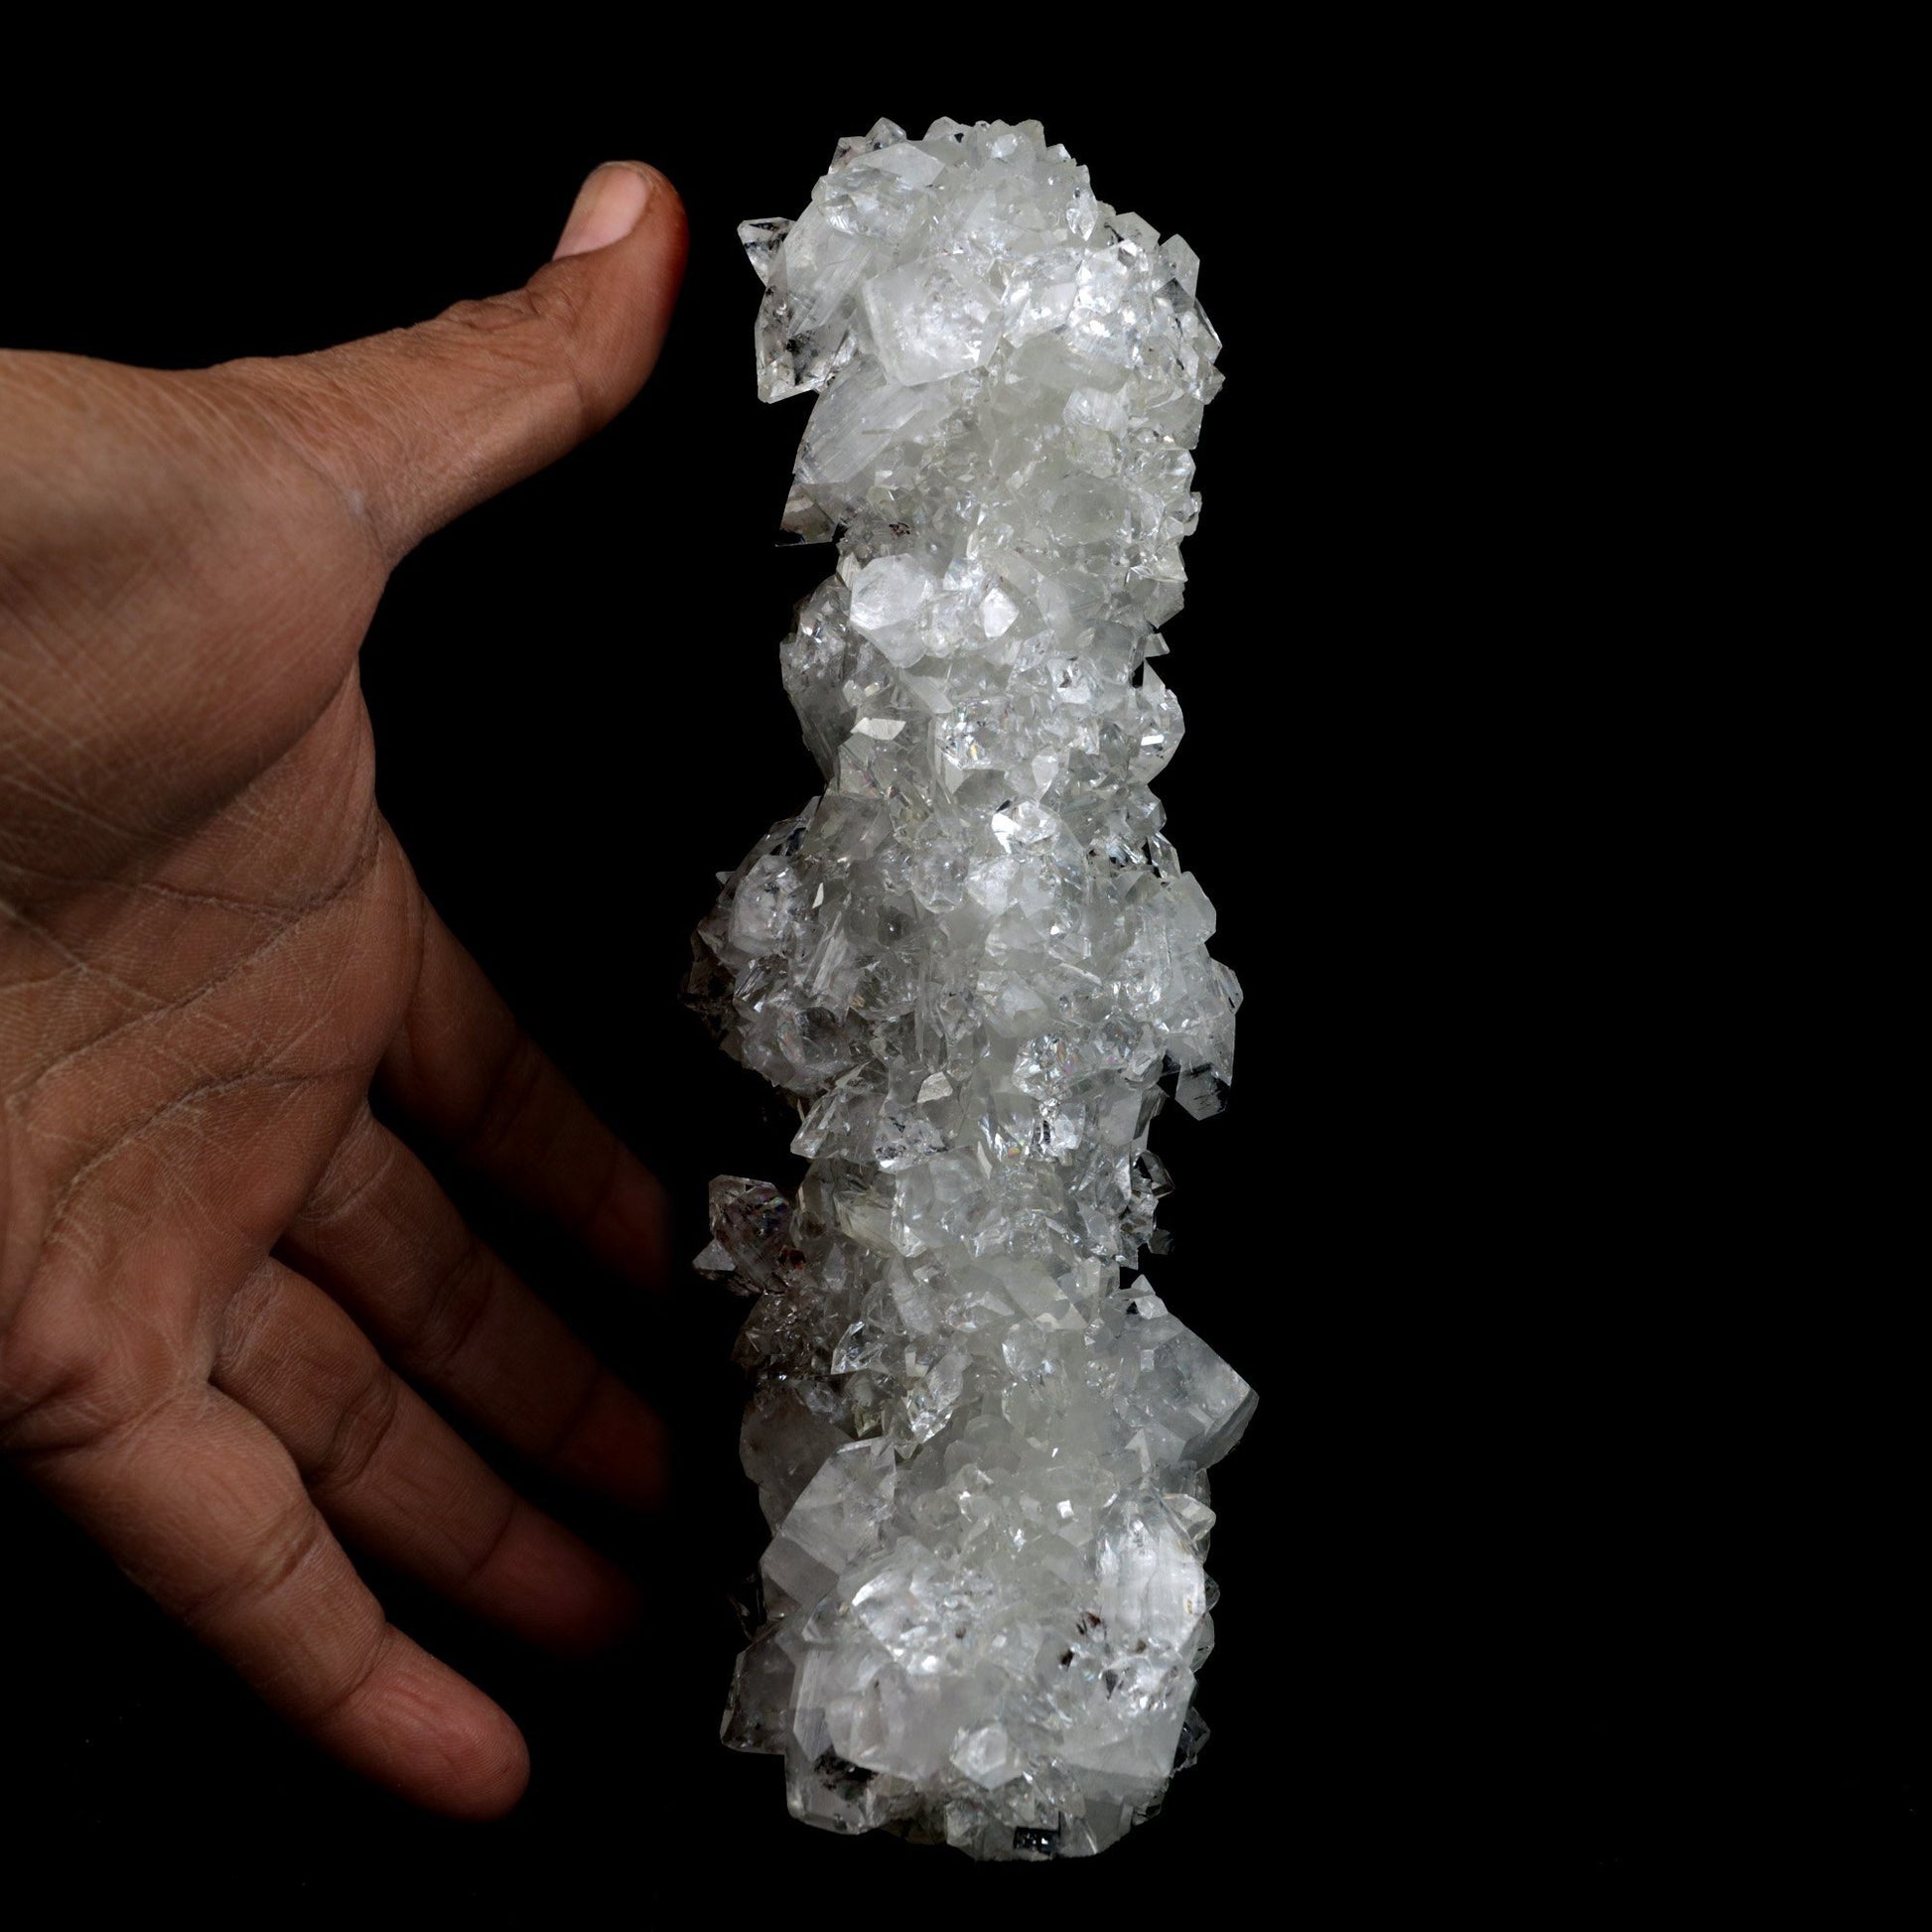 Apophyllite Sparkling Crystal Stalactite Natural Mineral Specimen # B …  https://www.superbminerals.us/products/apophyllite-sparkling-crystal-stalactite-natural-mineral-specimen-b-3913  FeaturesA splendid white, microcrystalline Apophyllite underground rock formation mostly covered with a glistening layer of Apophyllite crystals. The mix and differentiation alongside the radiance, shading and crystal development is remarkable. A striking and tasteful piece in superb condition.